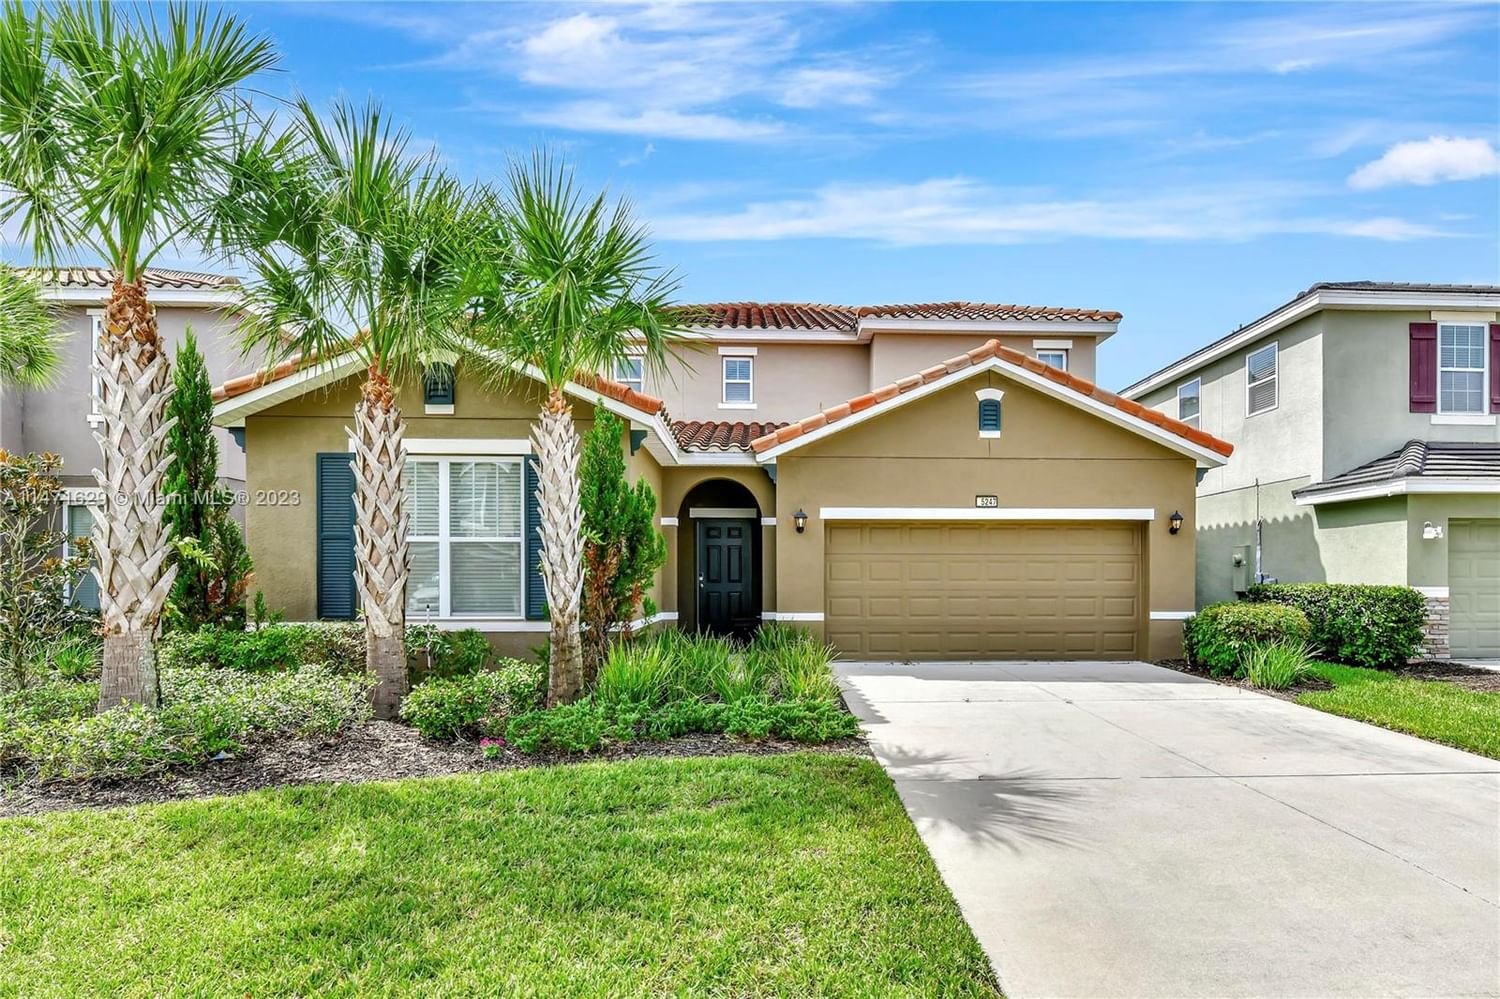 Real estate property located at 5247 Wildwood Way, Polk County, OAKMONT PHASE 1, Davenport, FL